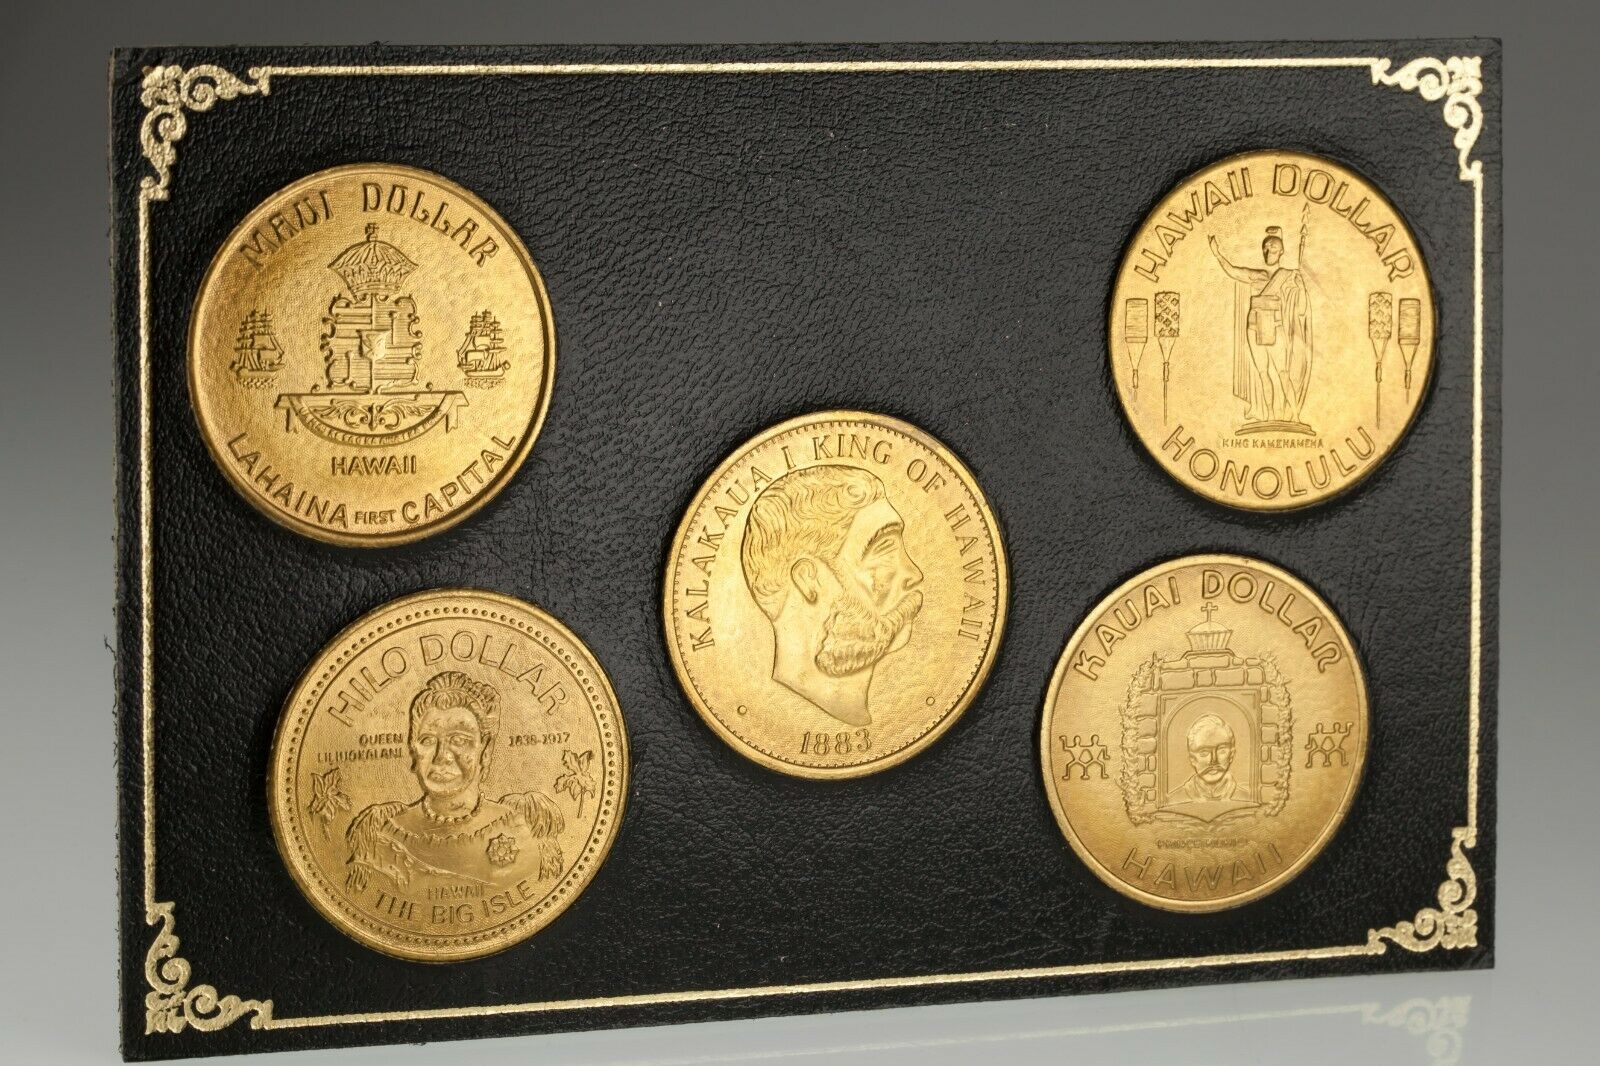 Coins of Hawaii Token Dollar Set in Original Frame and Sleeve